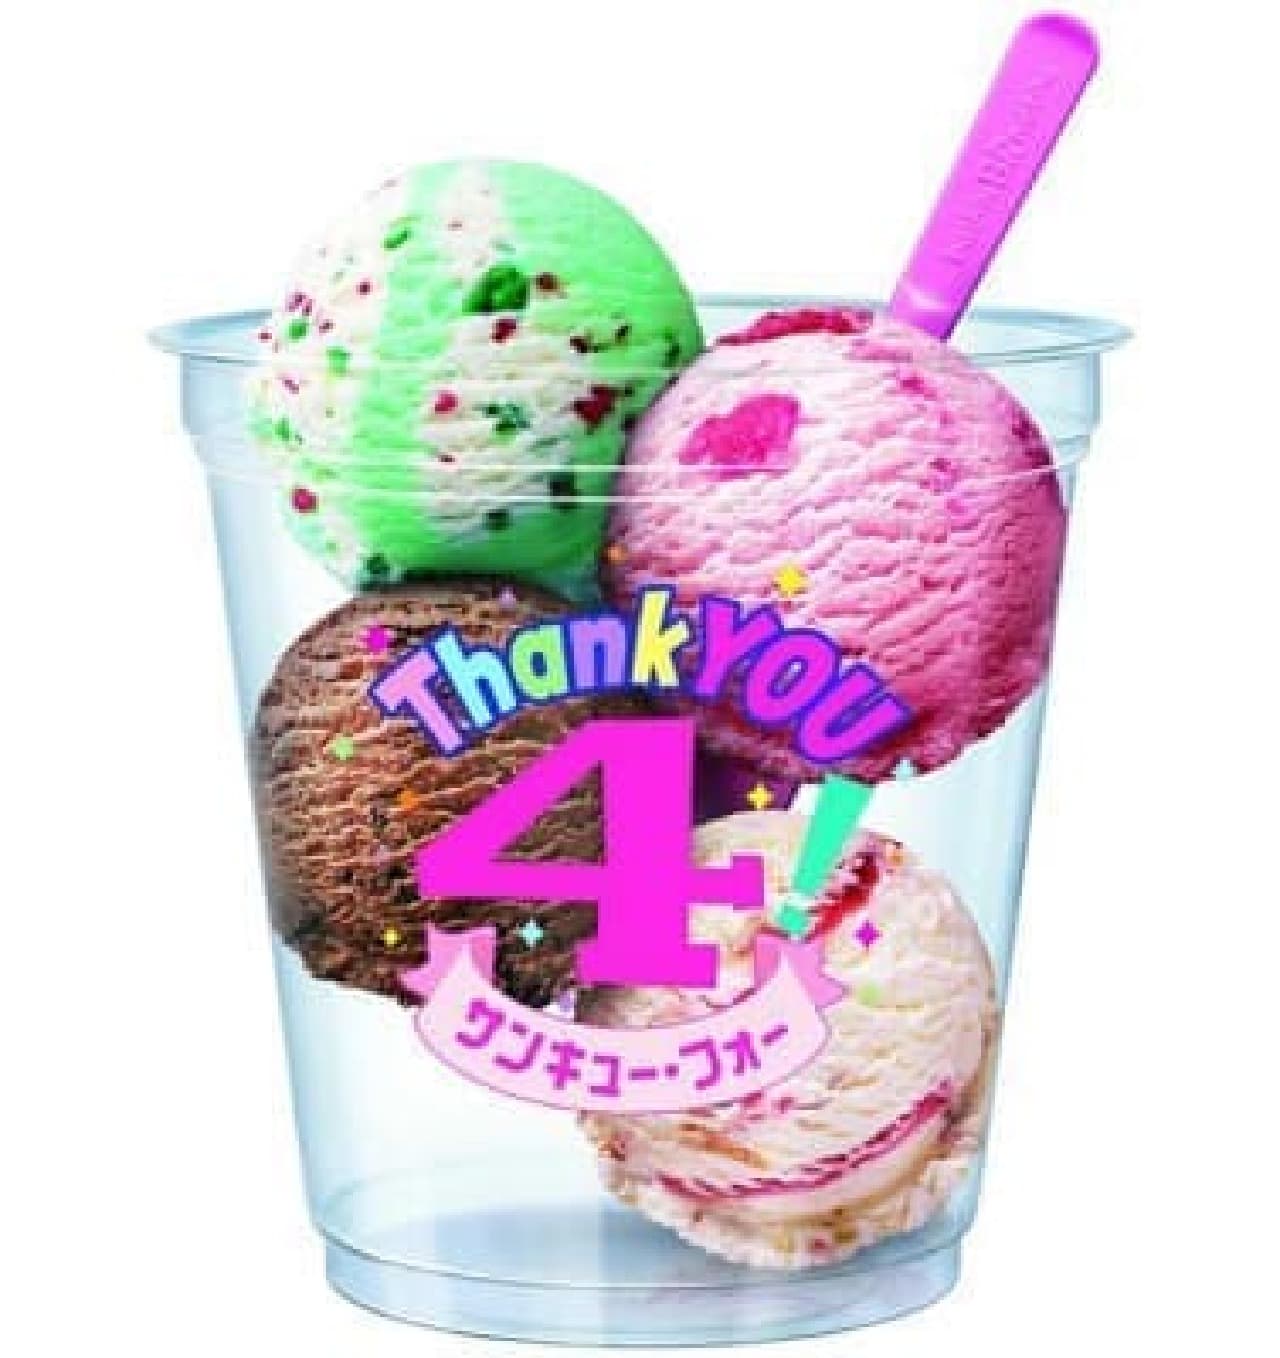 "Thank you 4" will be held with 4 types to choose from and a 40% increase!